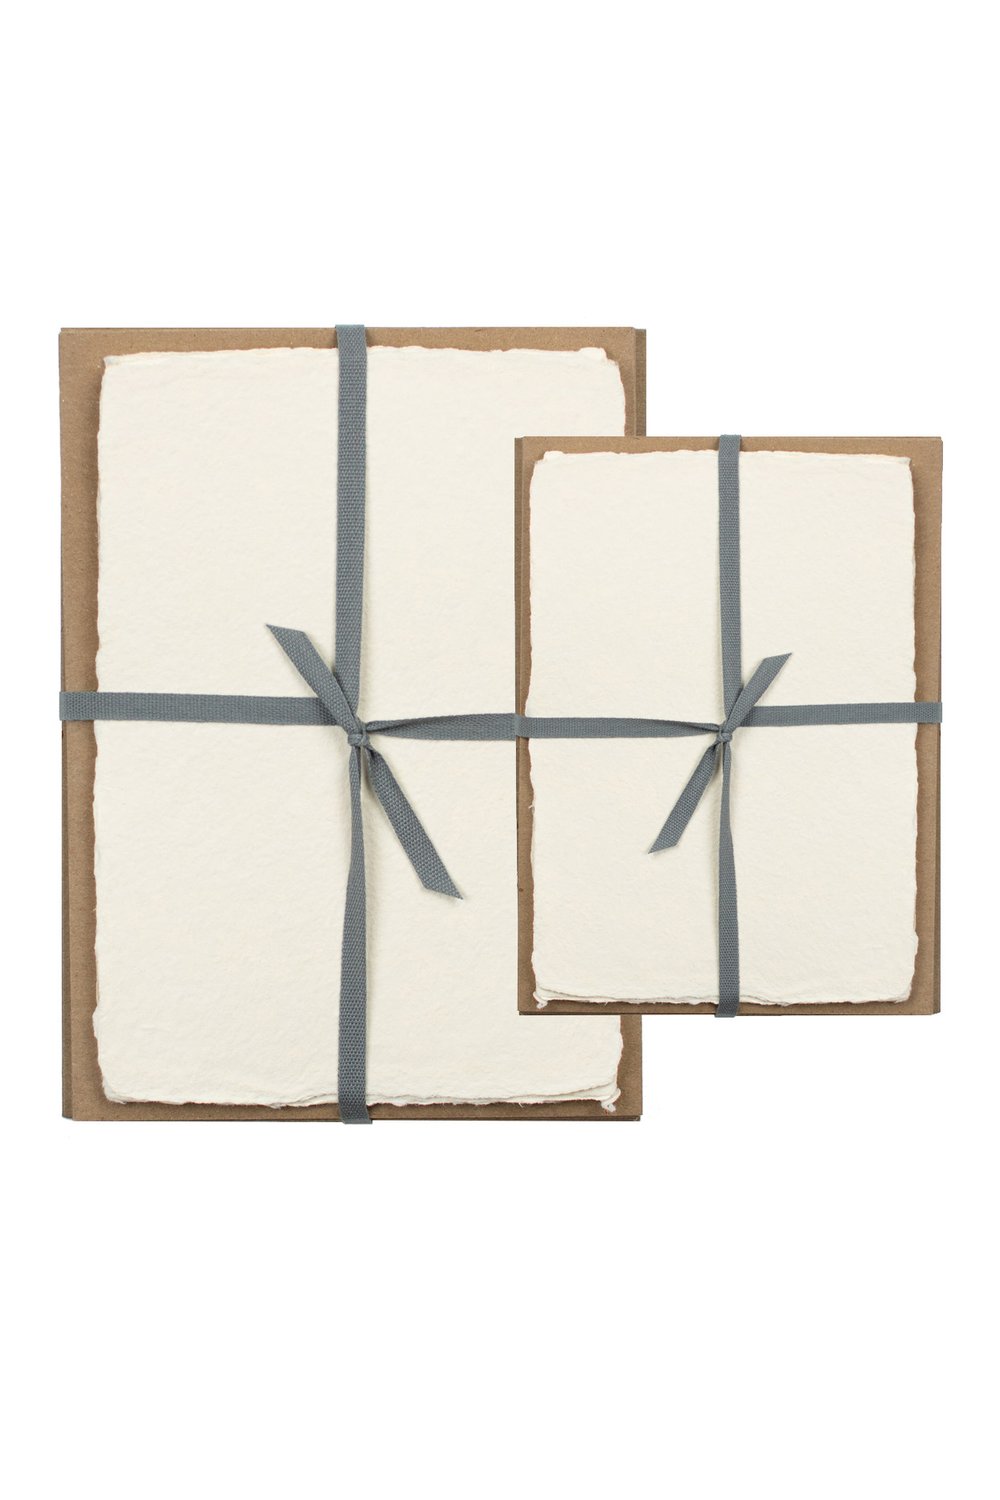 Handmade Paper / Papermaking Kits - oblation papers & press